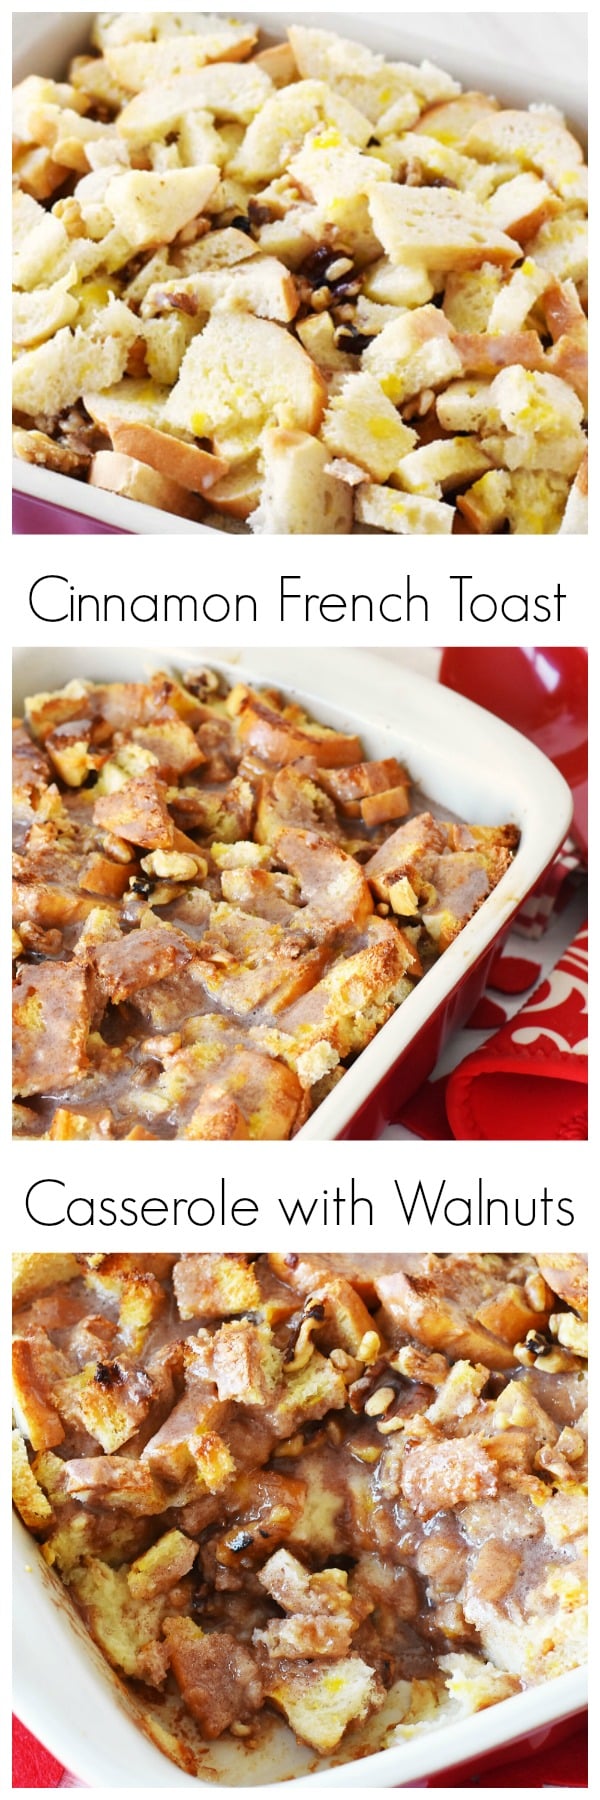 Cinnamon French Toast Casserole with Walnuts